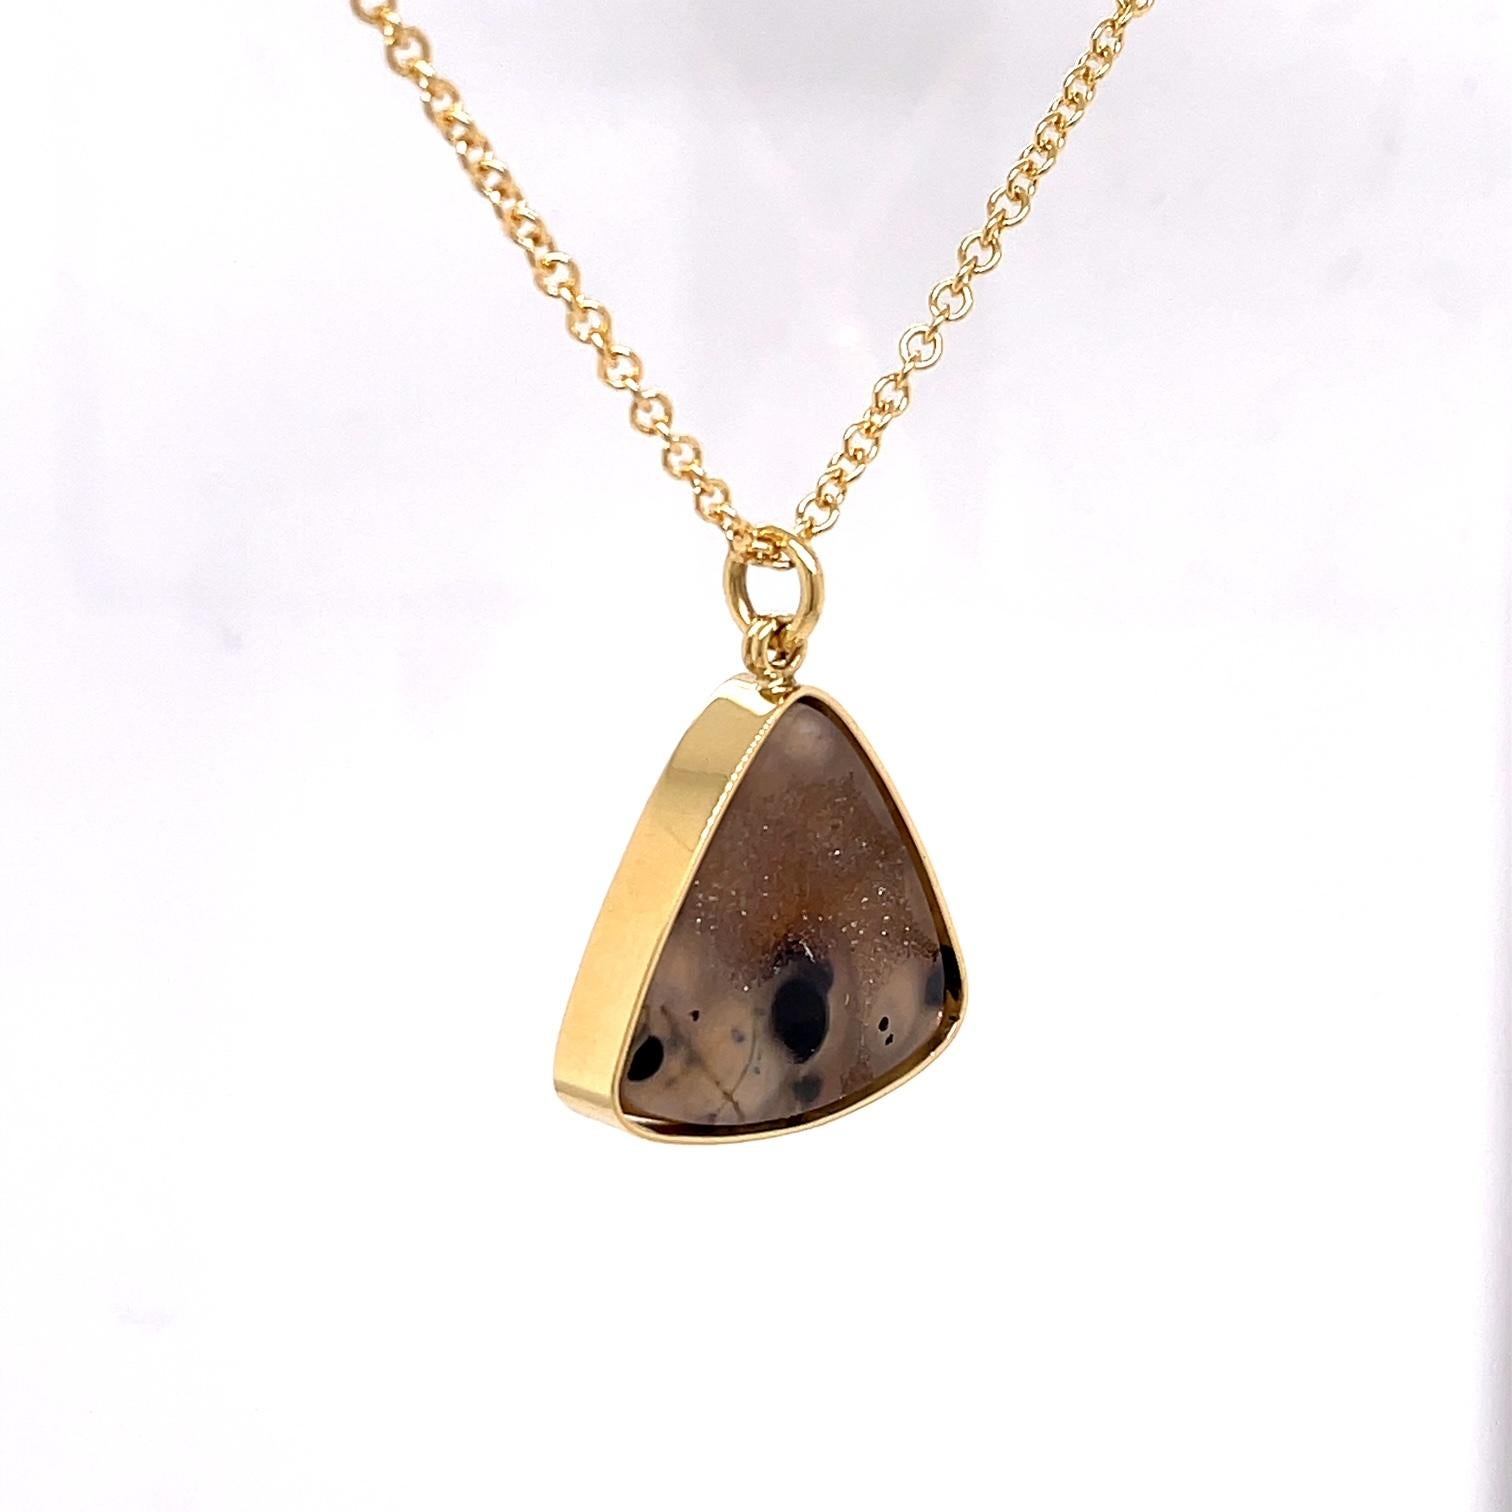 A 13.95 carat trillion shaped druzy necklace set in 18k yellow gold, on a 14k yellow gold 18 inch 2mm cable chain. This necklace was made and designed by llyn strong.